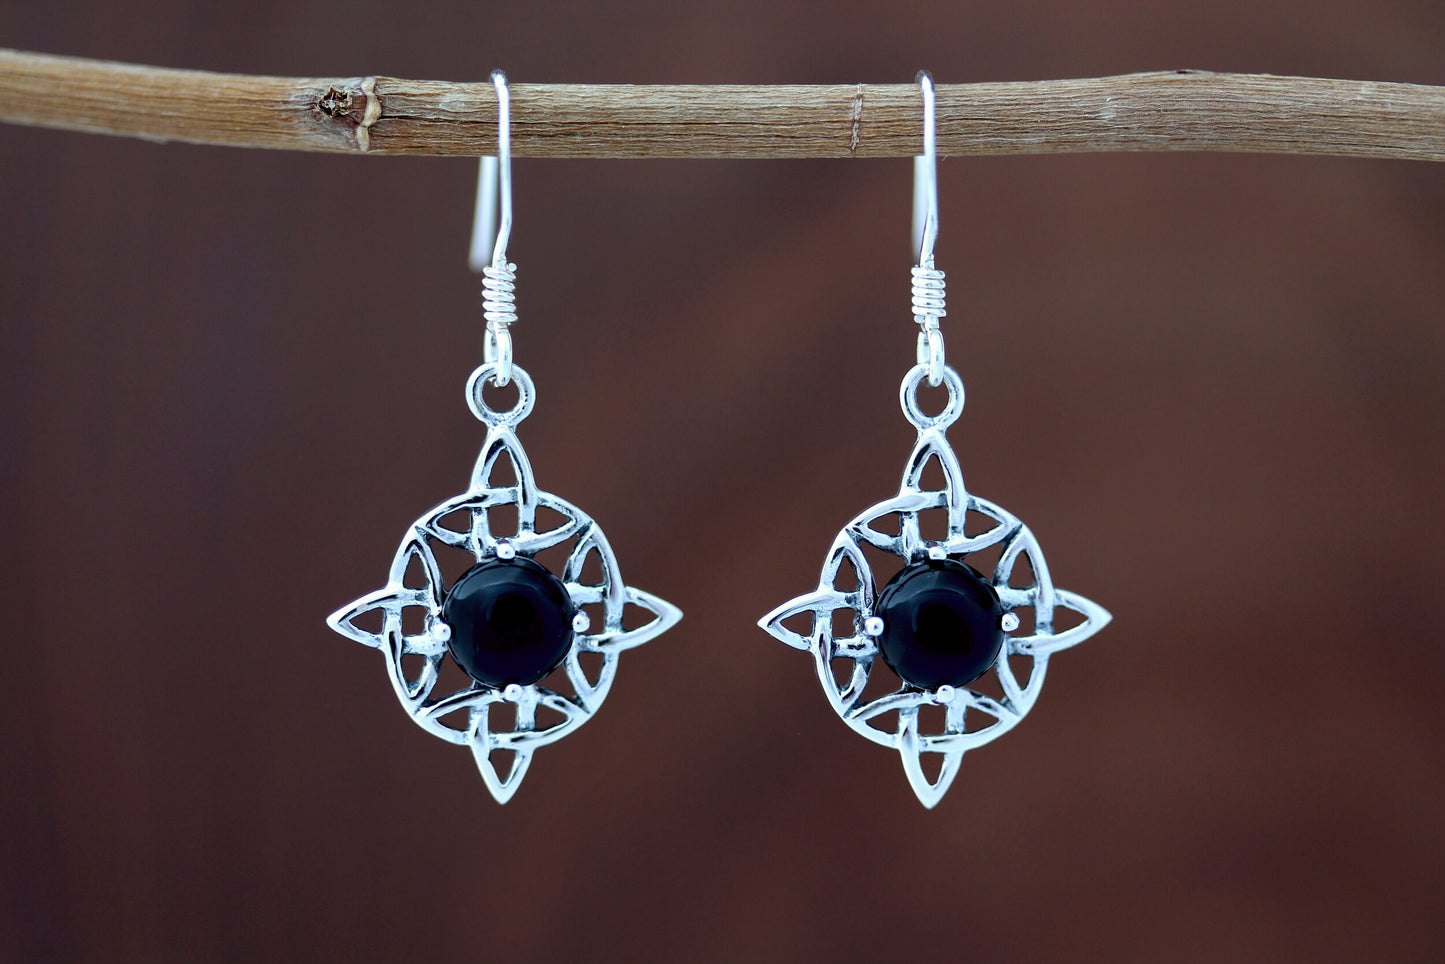 Celtic Knot Earrings - Dara Knot with Black Onyx